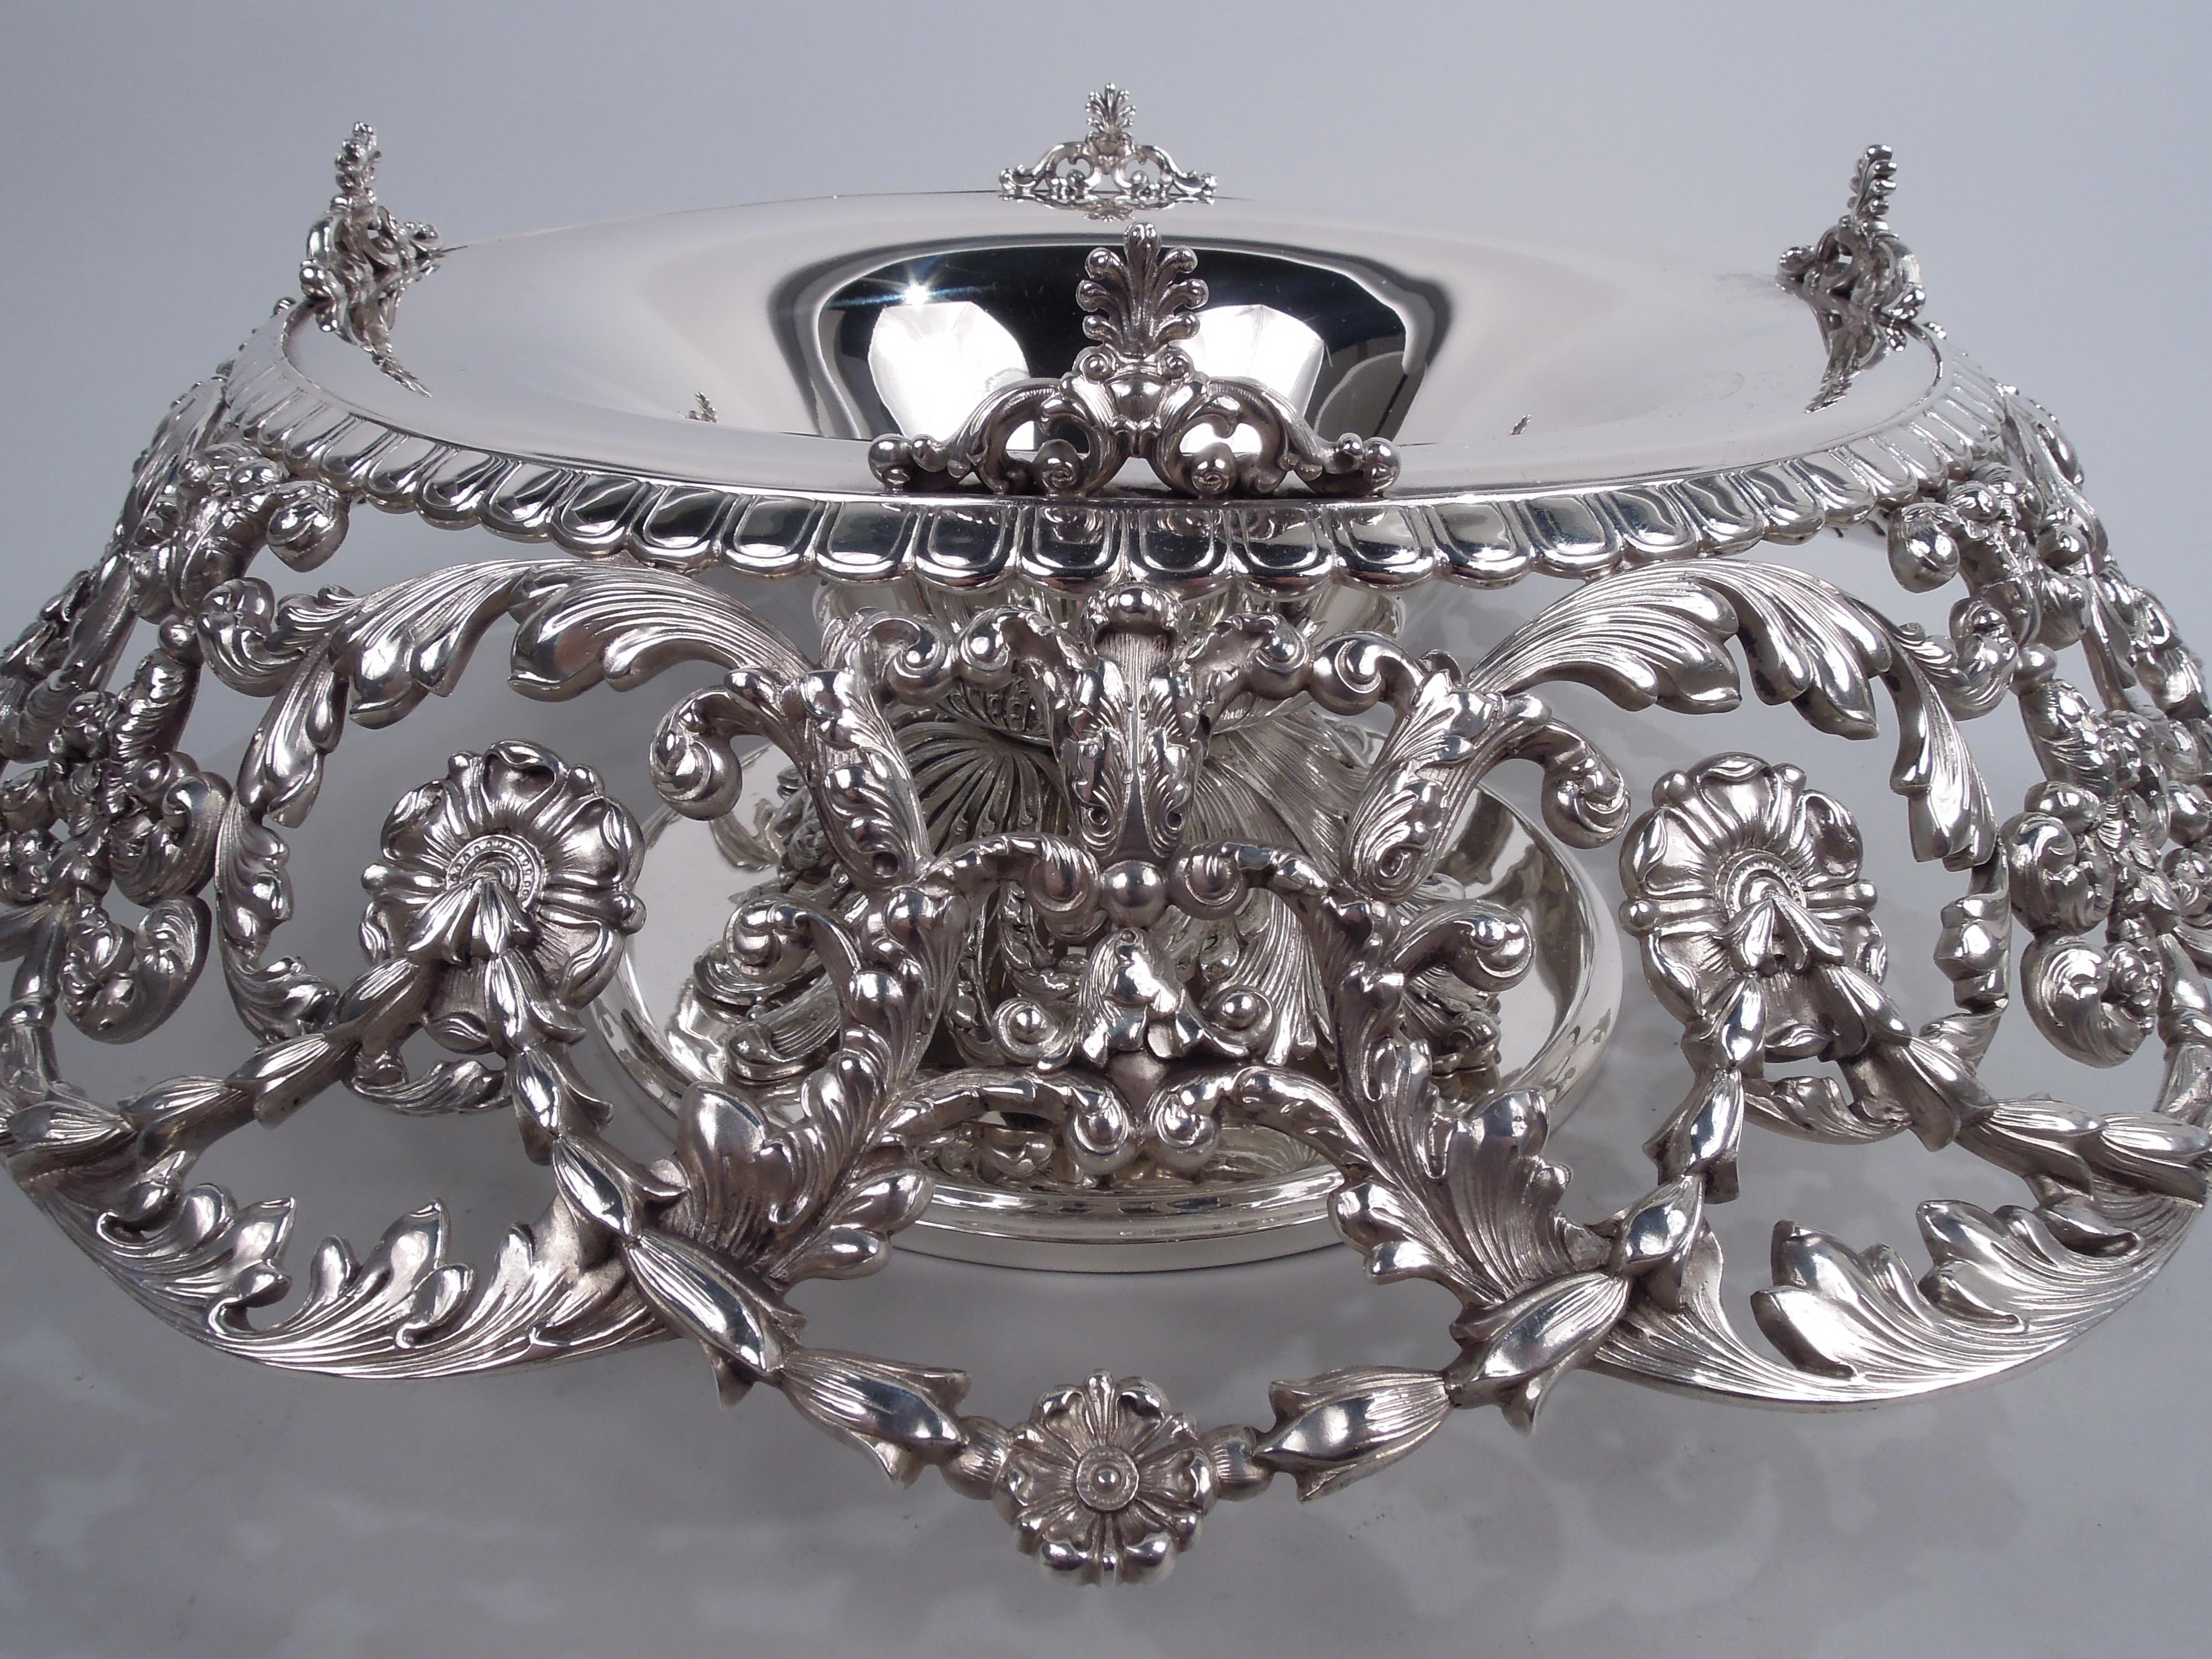 Sumptuous Tiffany Edwardian Classical Sterling Silver Centerpiece Bowl For Sale 2